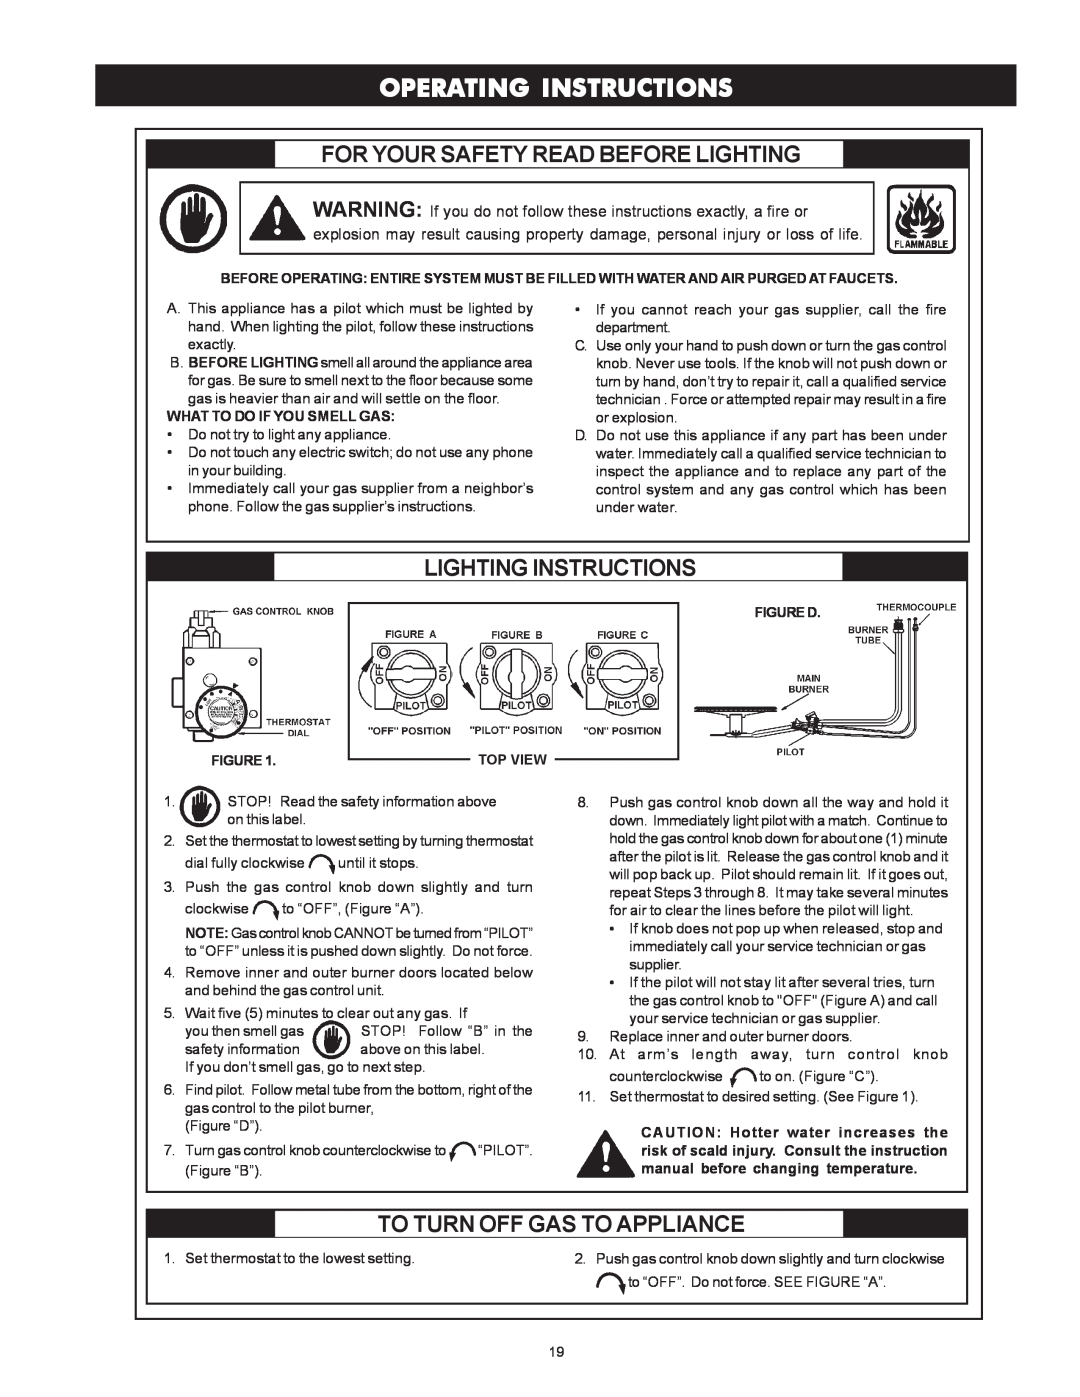 Maytag HRP5975S Operating Instructions, For Your Safety Read Before Lighting, Lighting Instructions, Figure D, Top View 